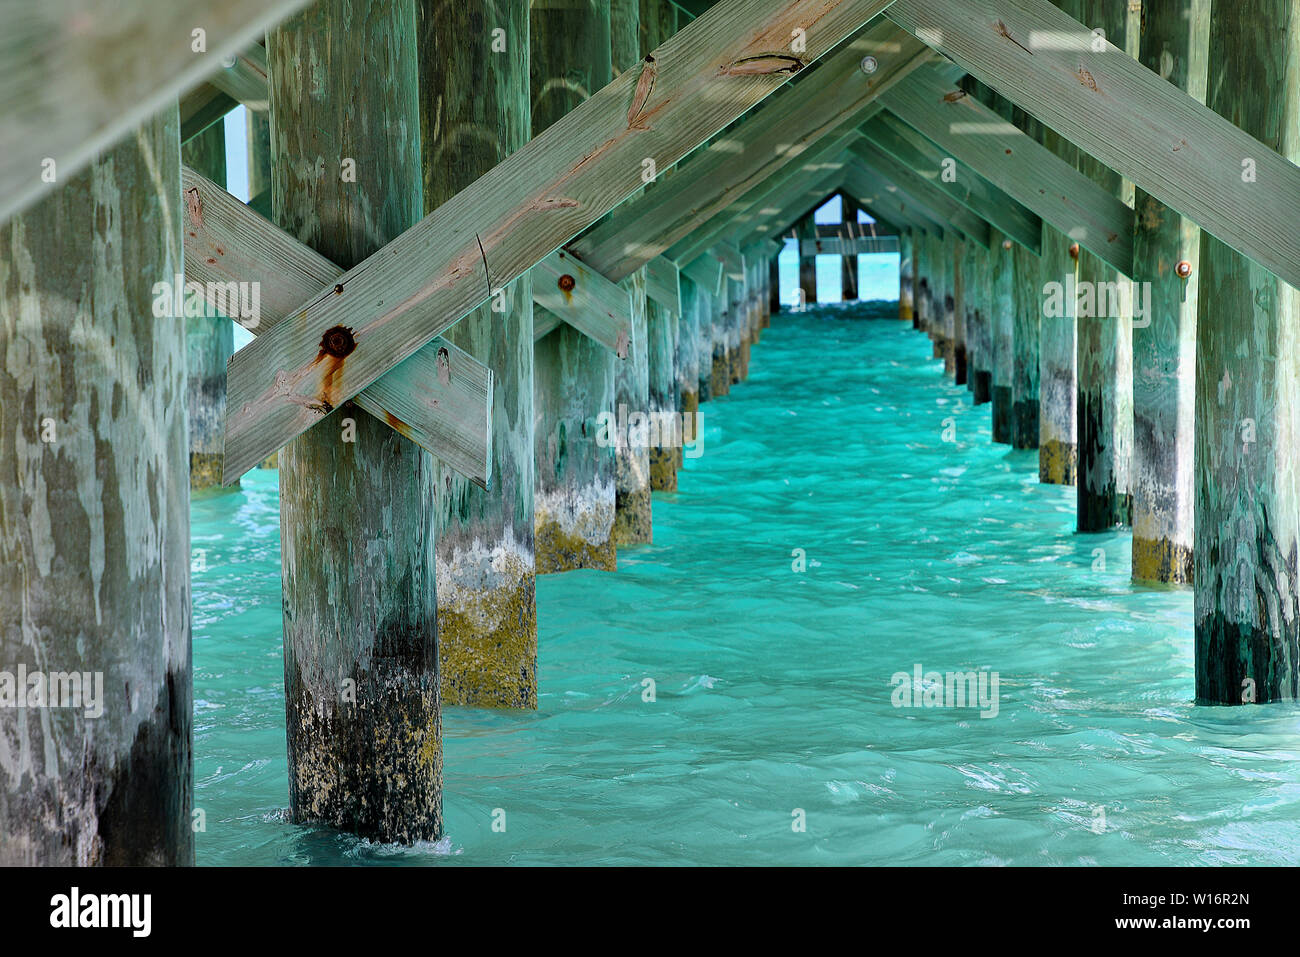 underside view of pier in Nassau Bahamas with turquoise ocean water Stock Photo